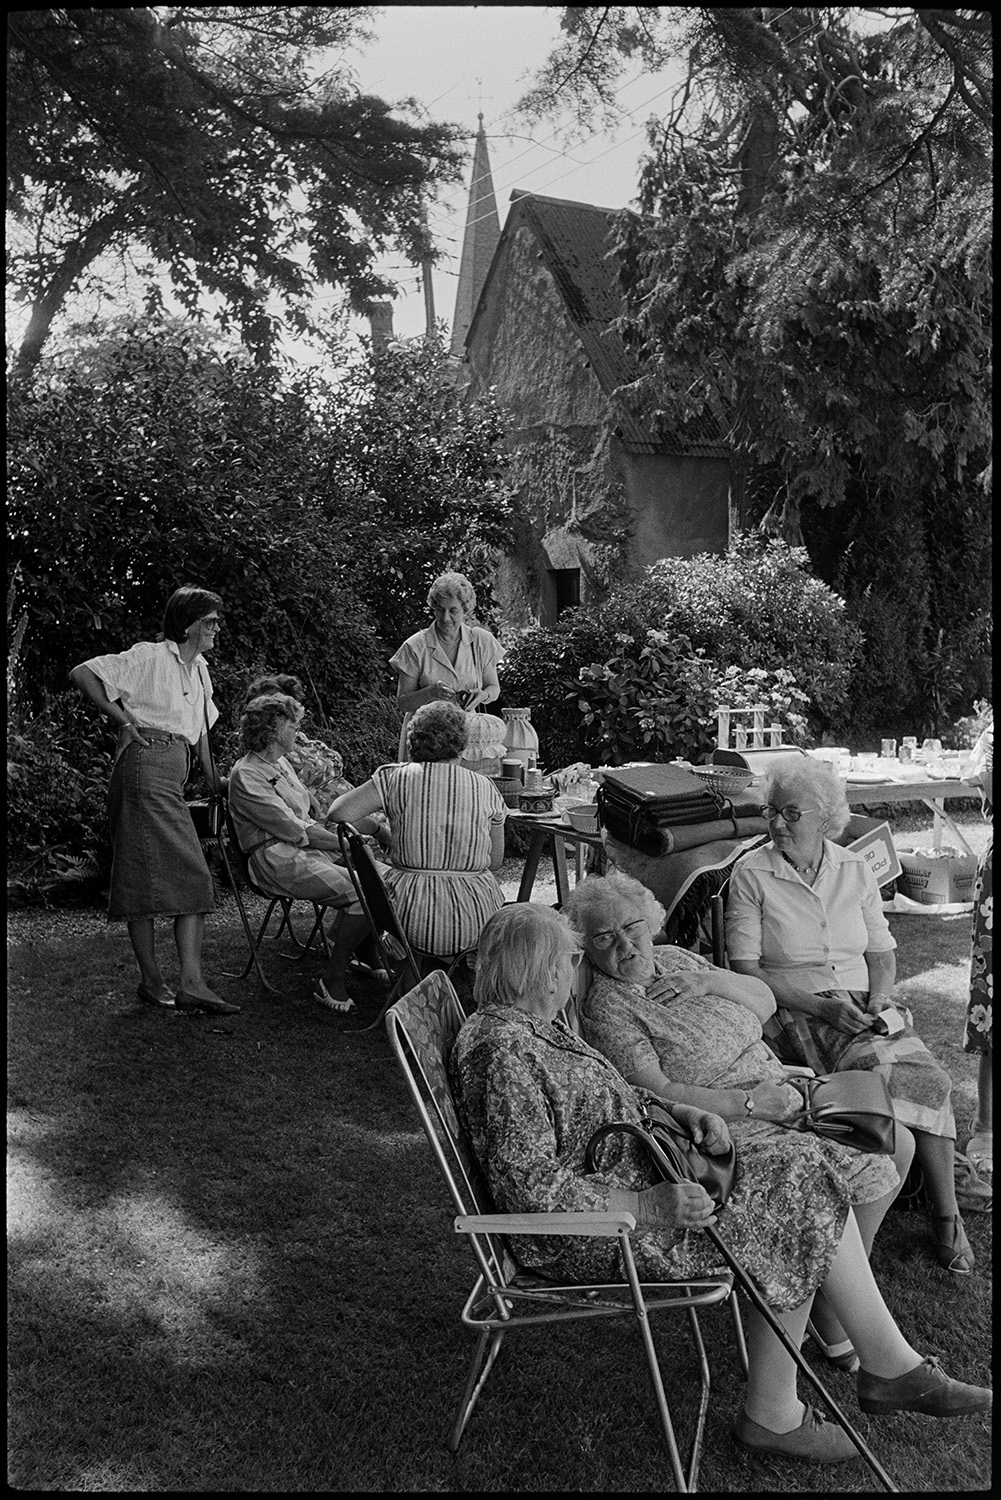 Vicarage fete, garden party people sitting at table with tea and cakes, women chatting. 
[Women sat on garden chairs and talking at Kings Nympton vicarage fete, in the shade of trees.]